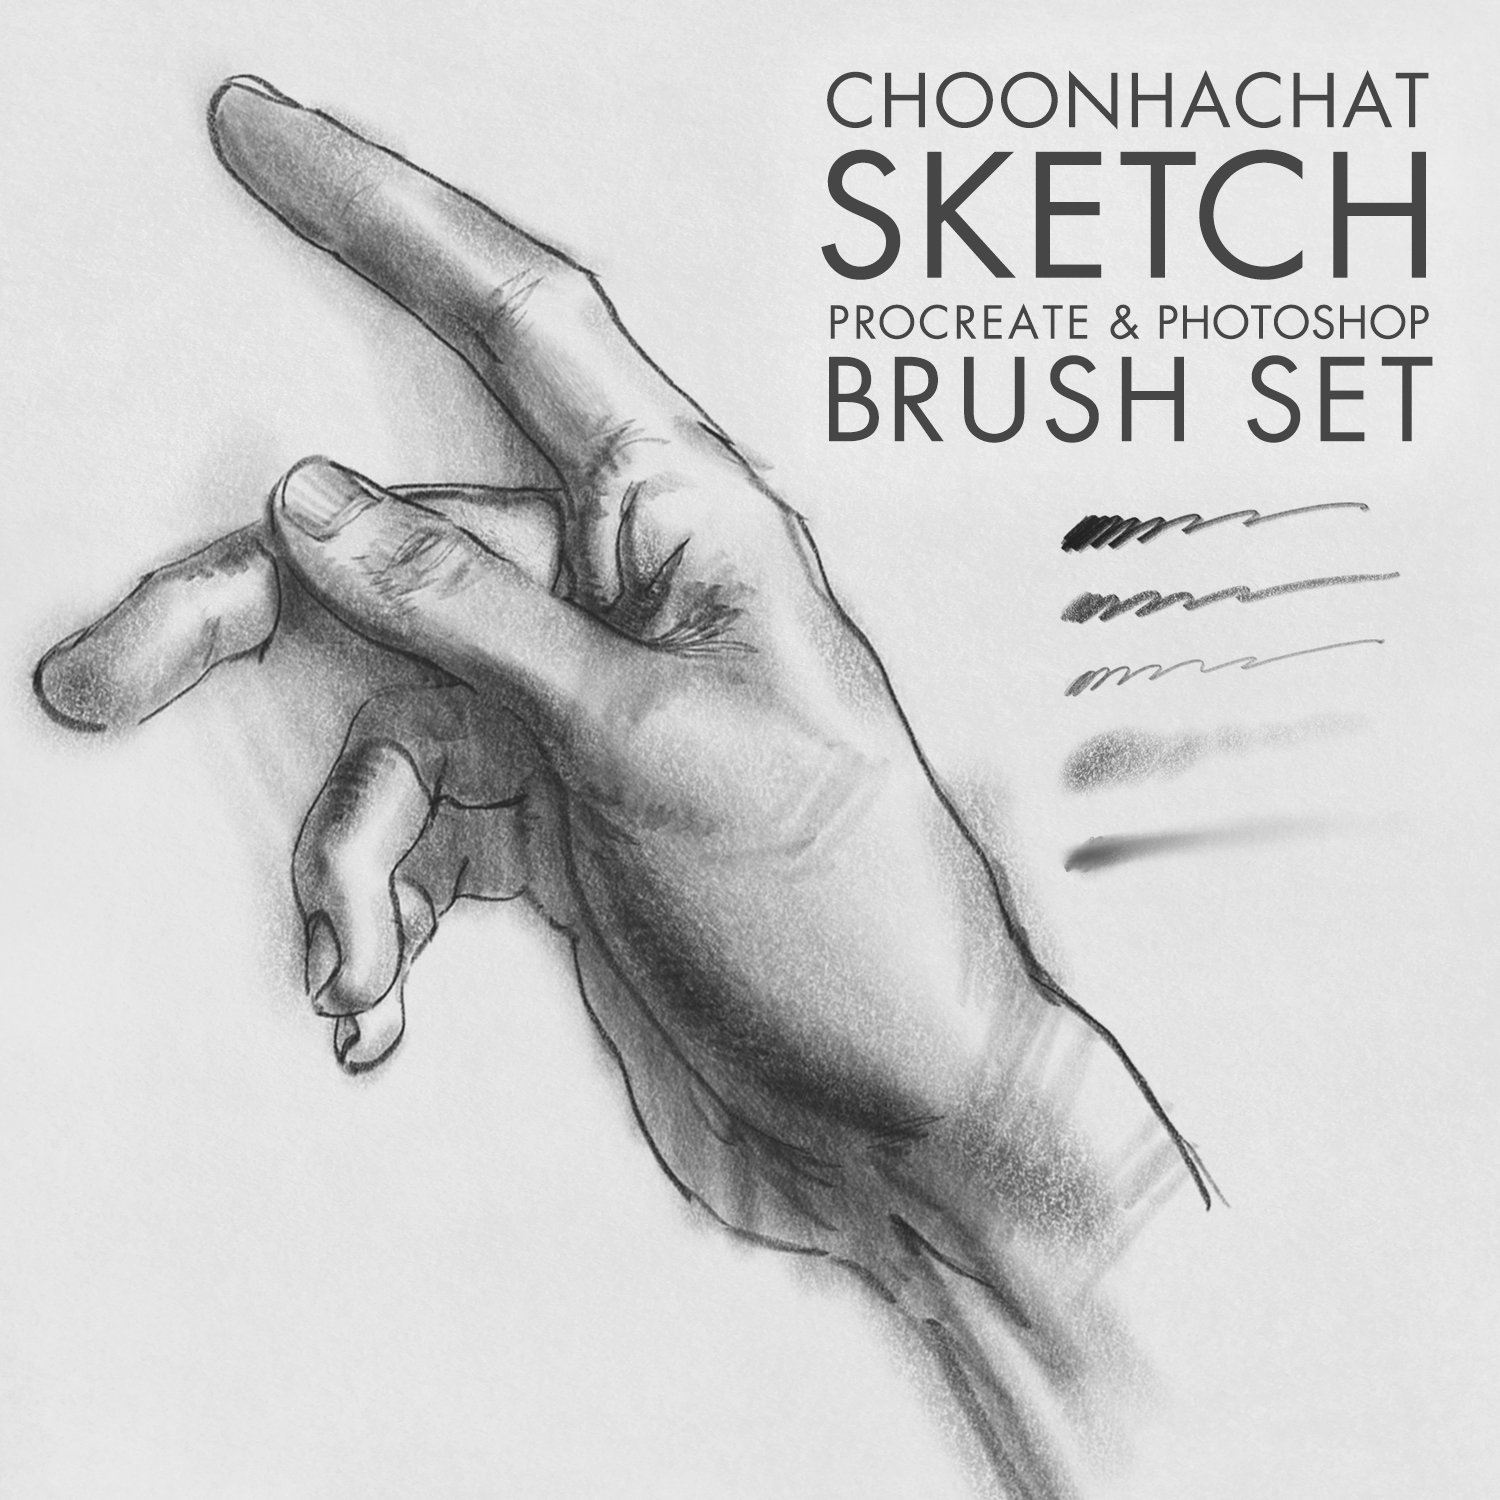 17 SuperRealistic Pencil Brushes for Photoshop CC  Medialoot